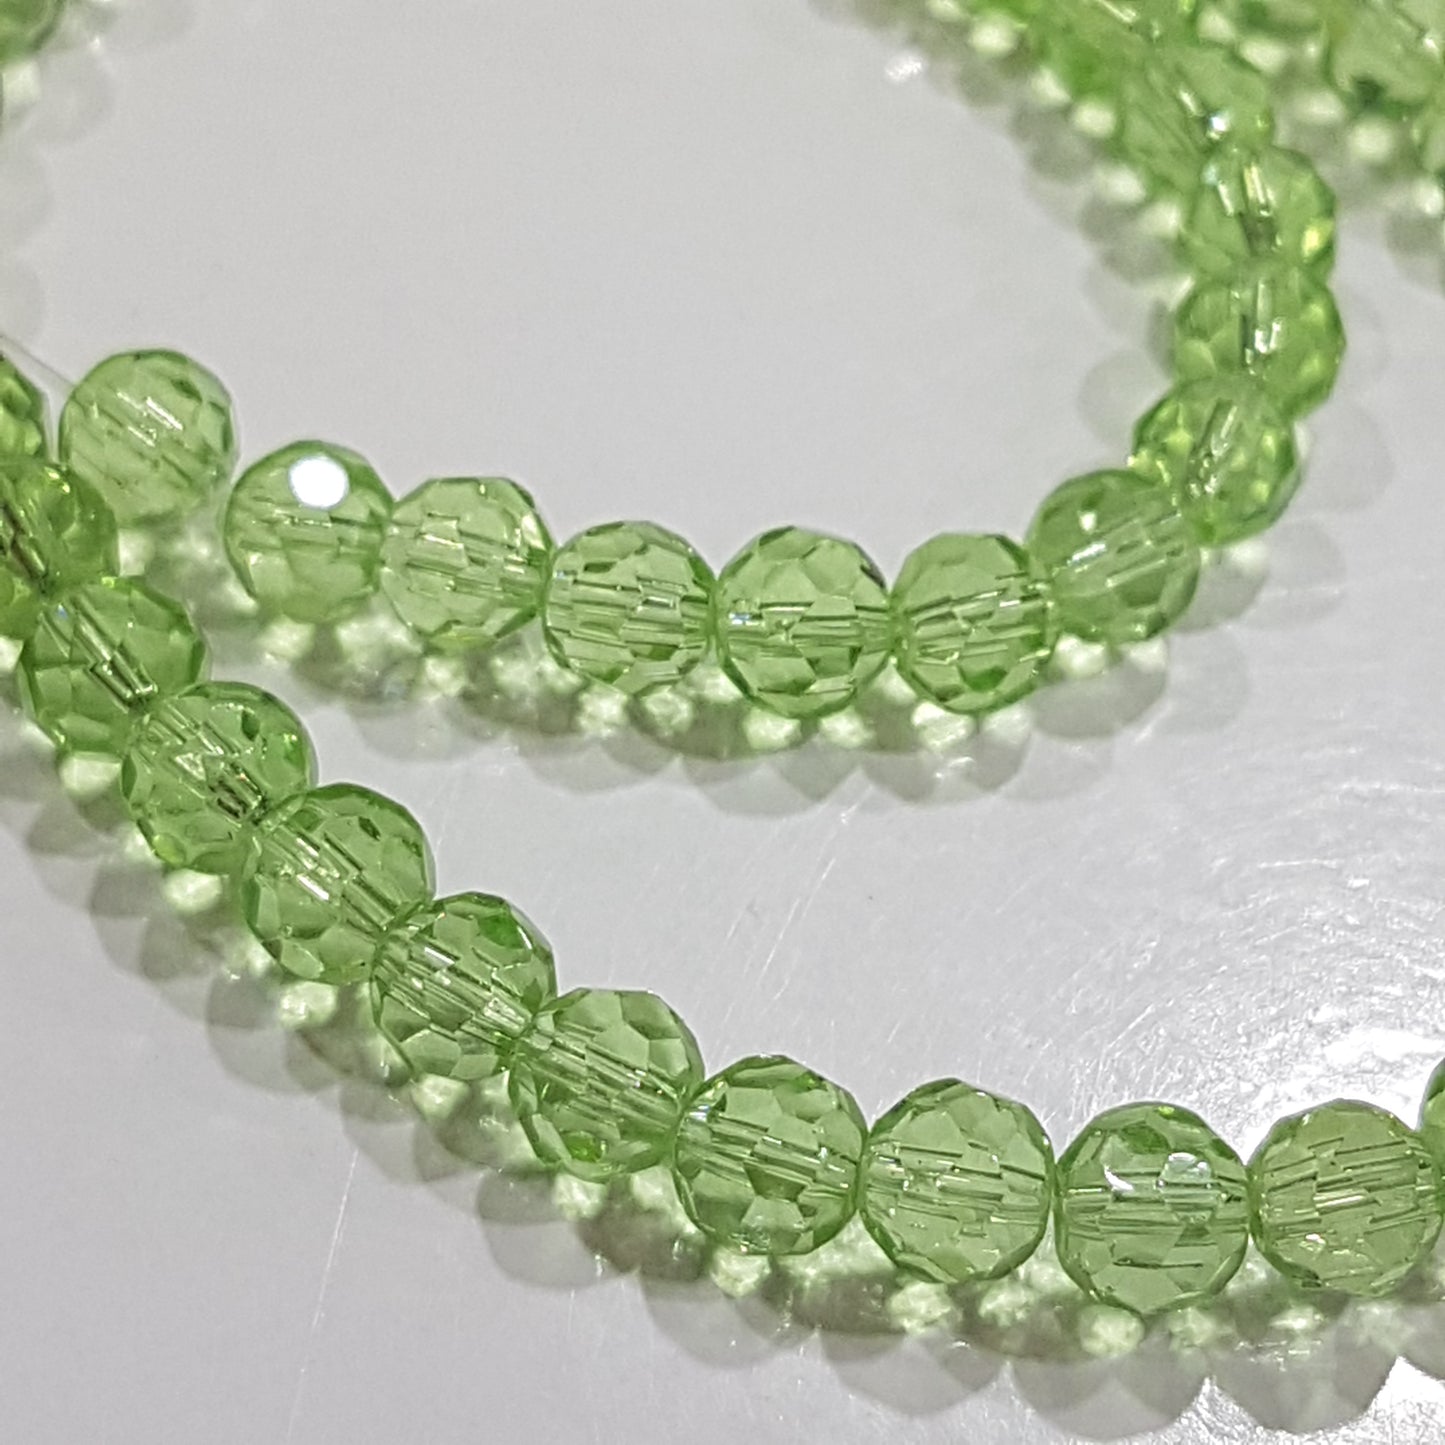 5mm Green Faceted Glass Beads